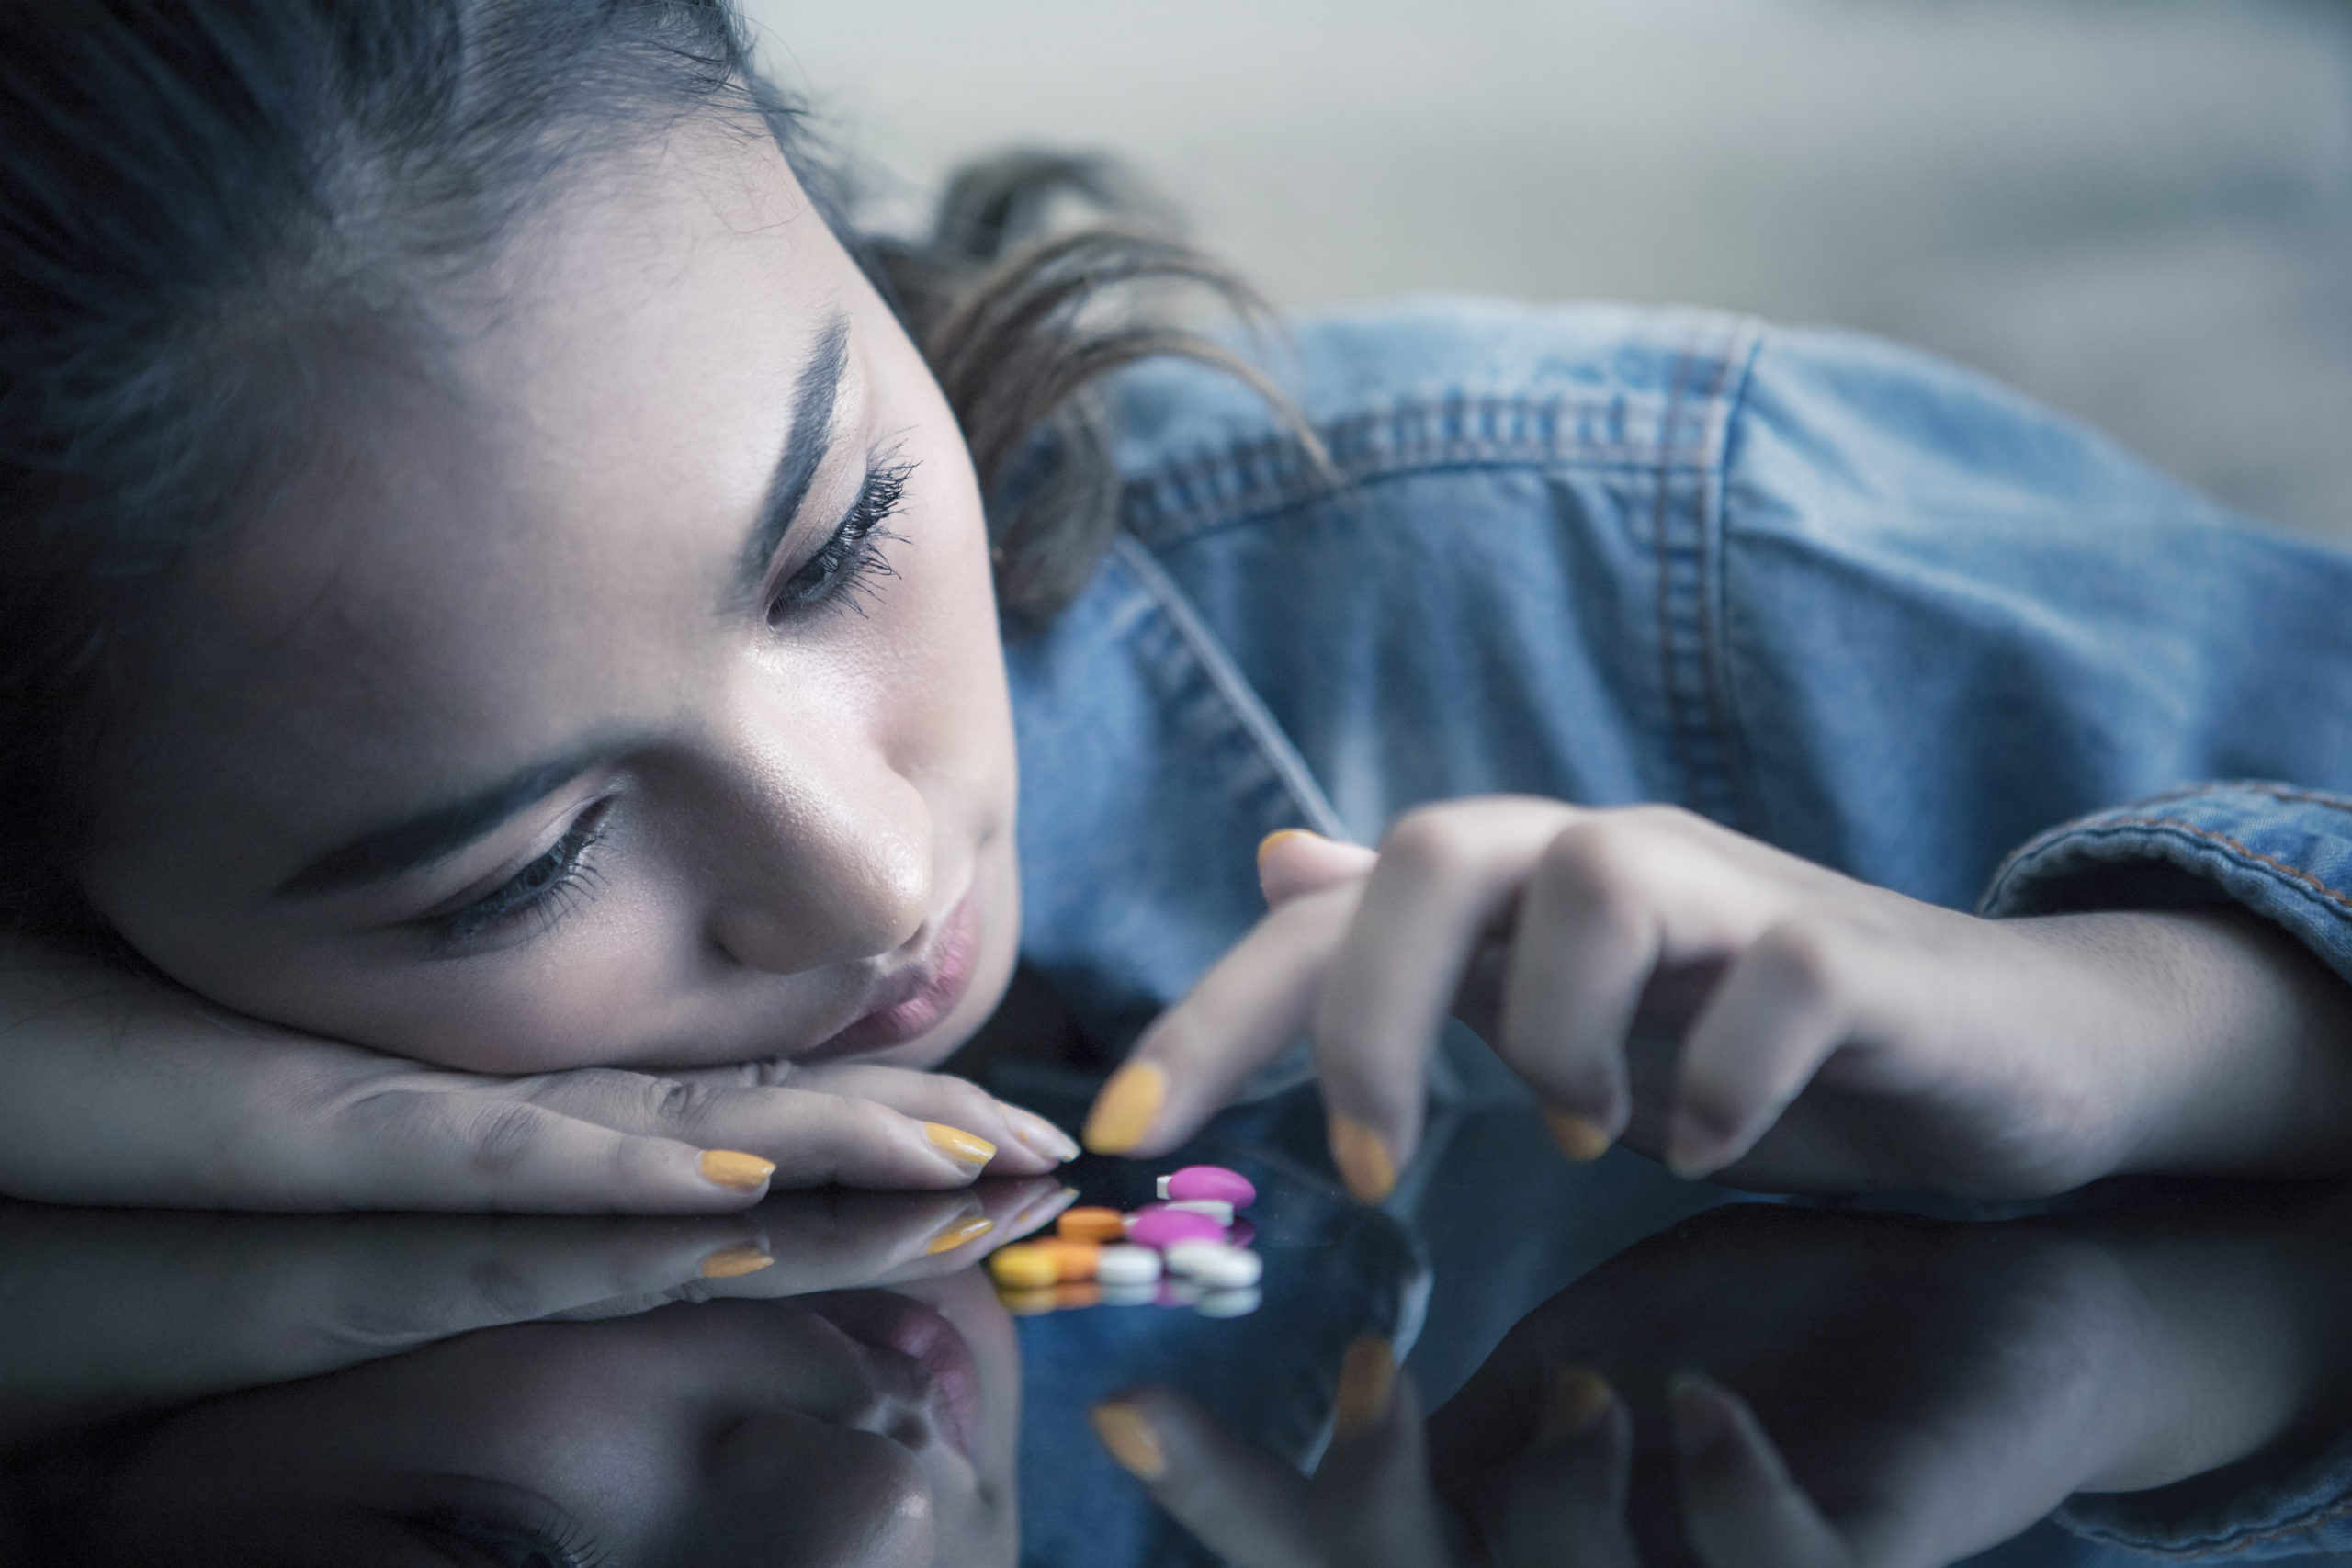 ecstasy abuse and addiction treatment